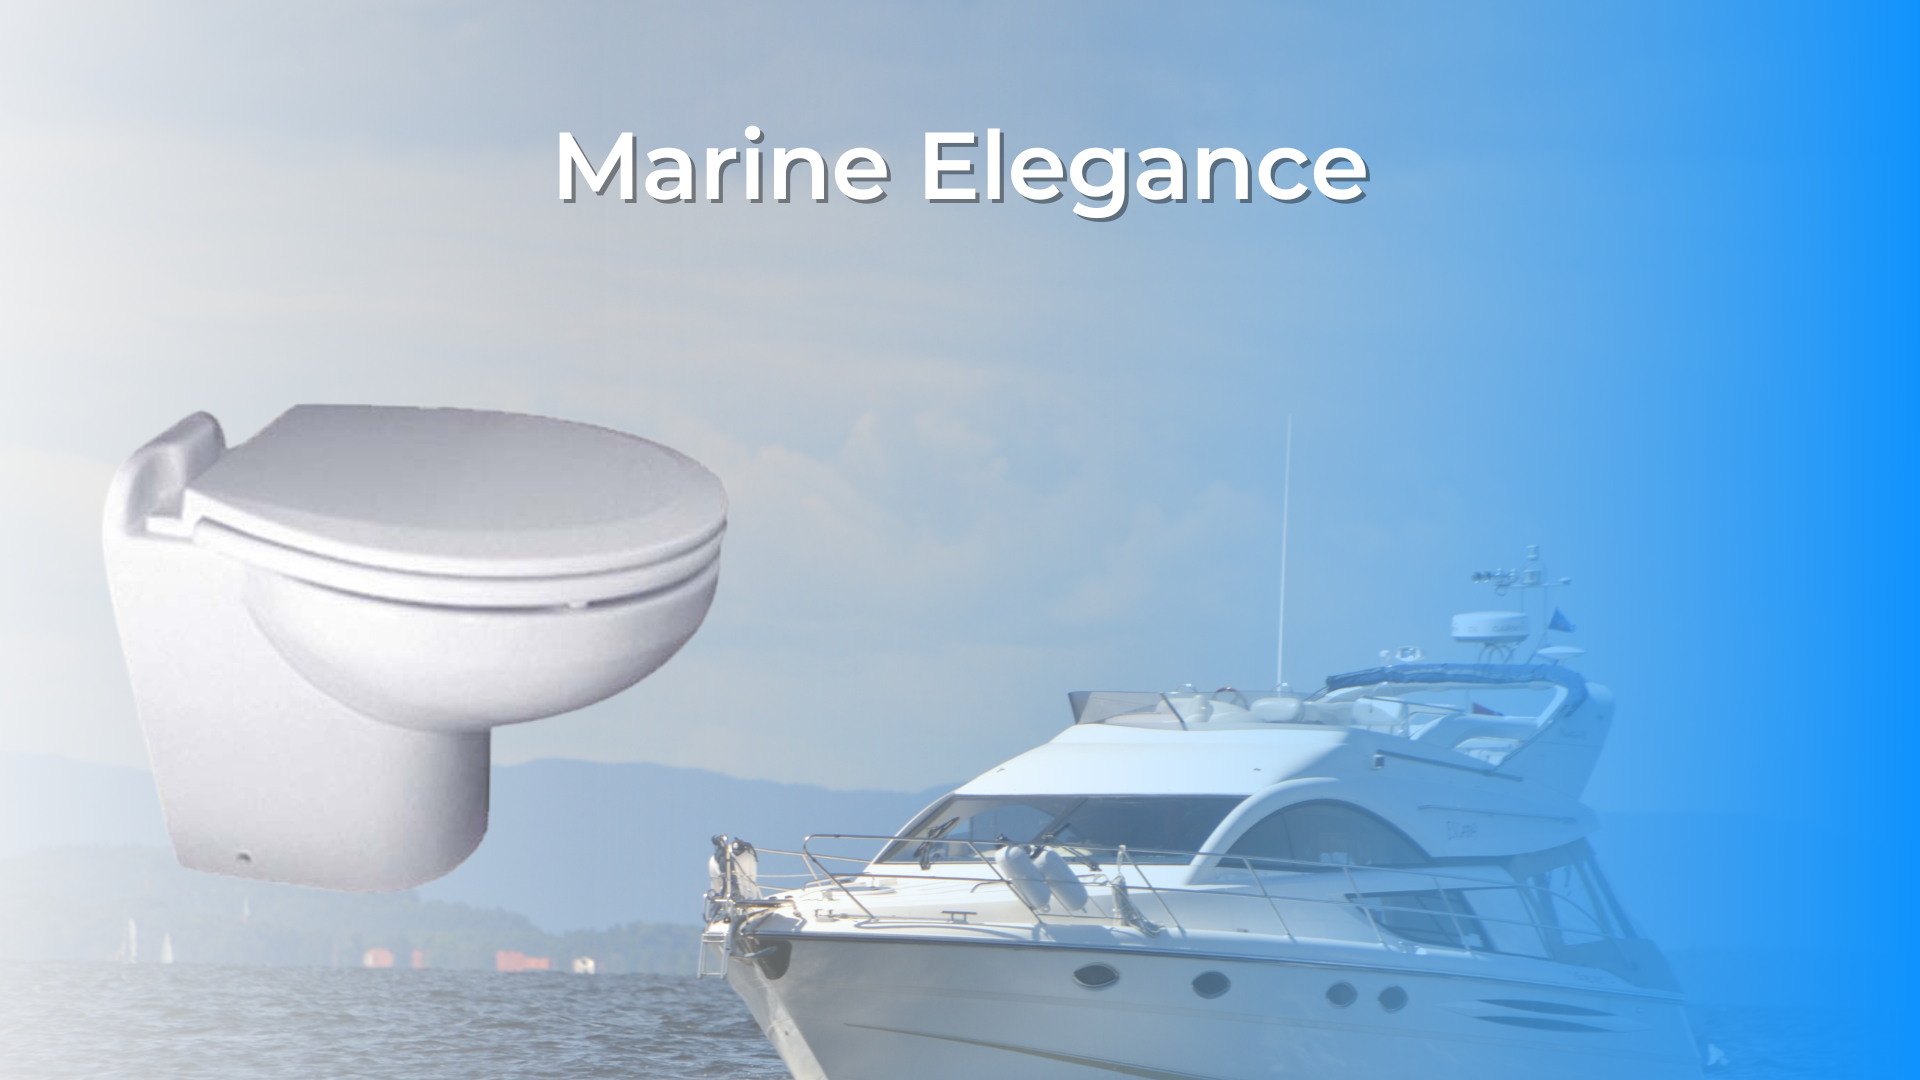 Marine Elegance - A Perfect Toilet for Your Boat